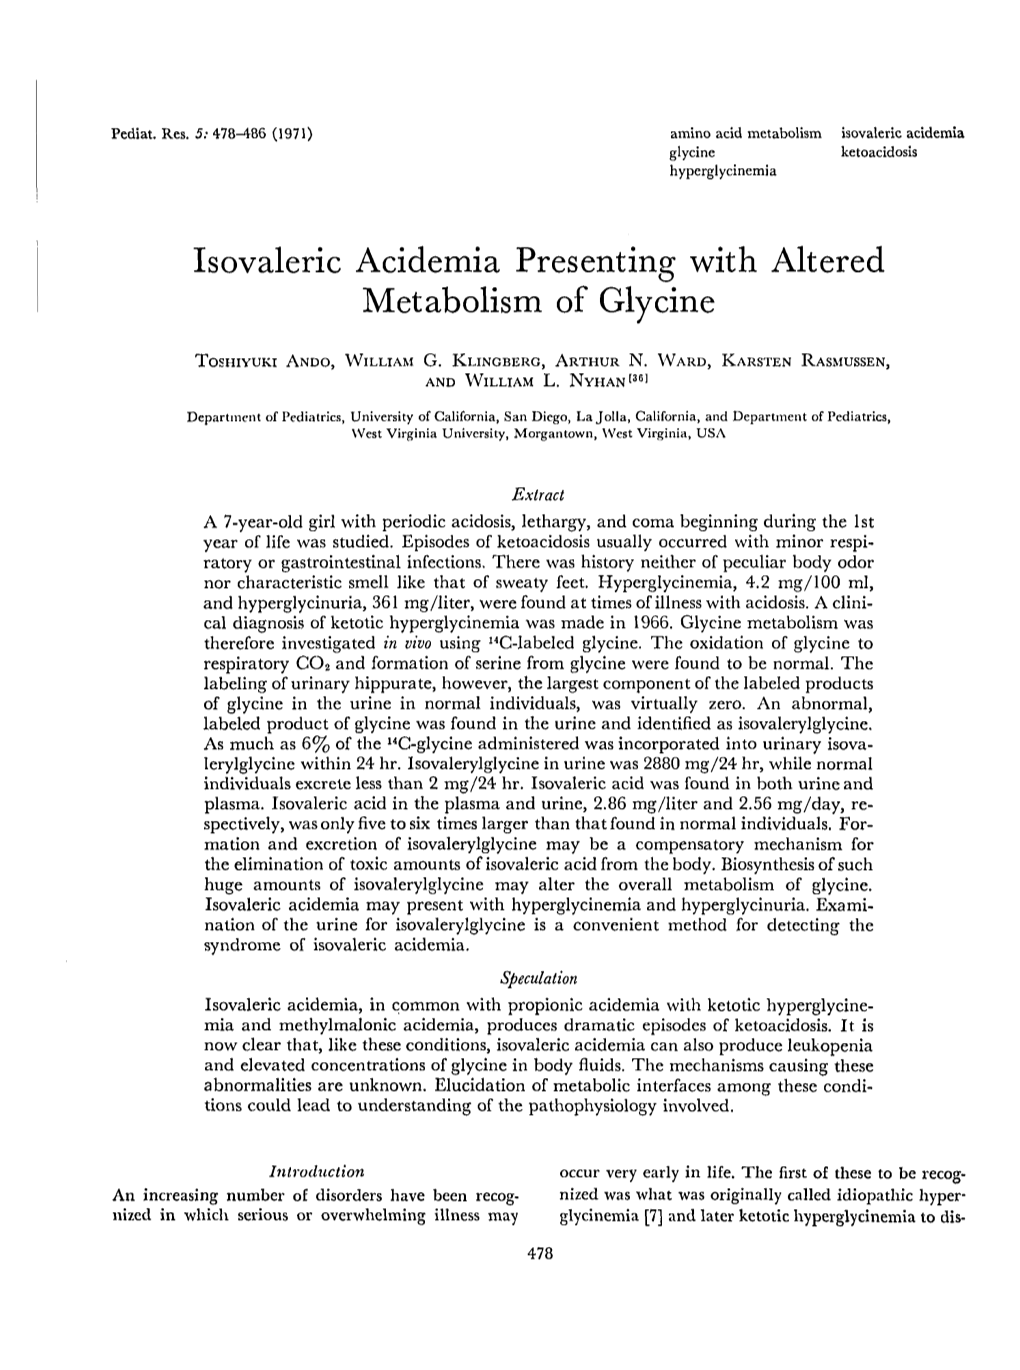 Isovaleric Acidemia Presenting with Altered Metabolism of Glycine